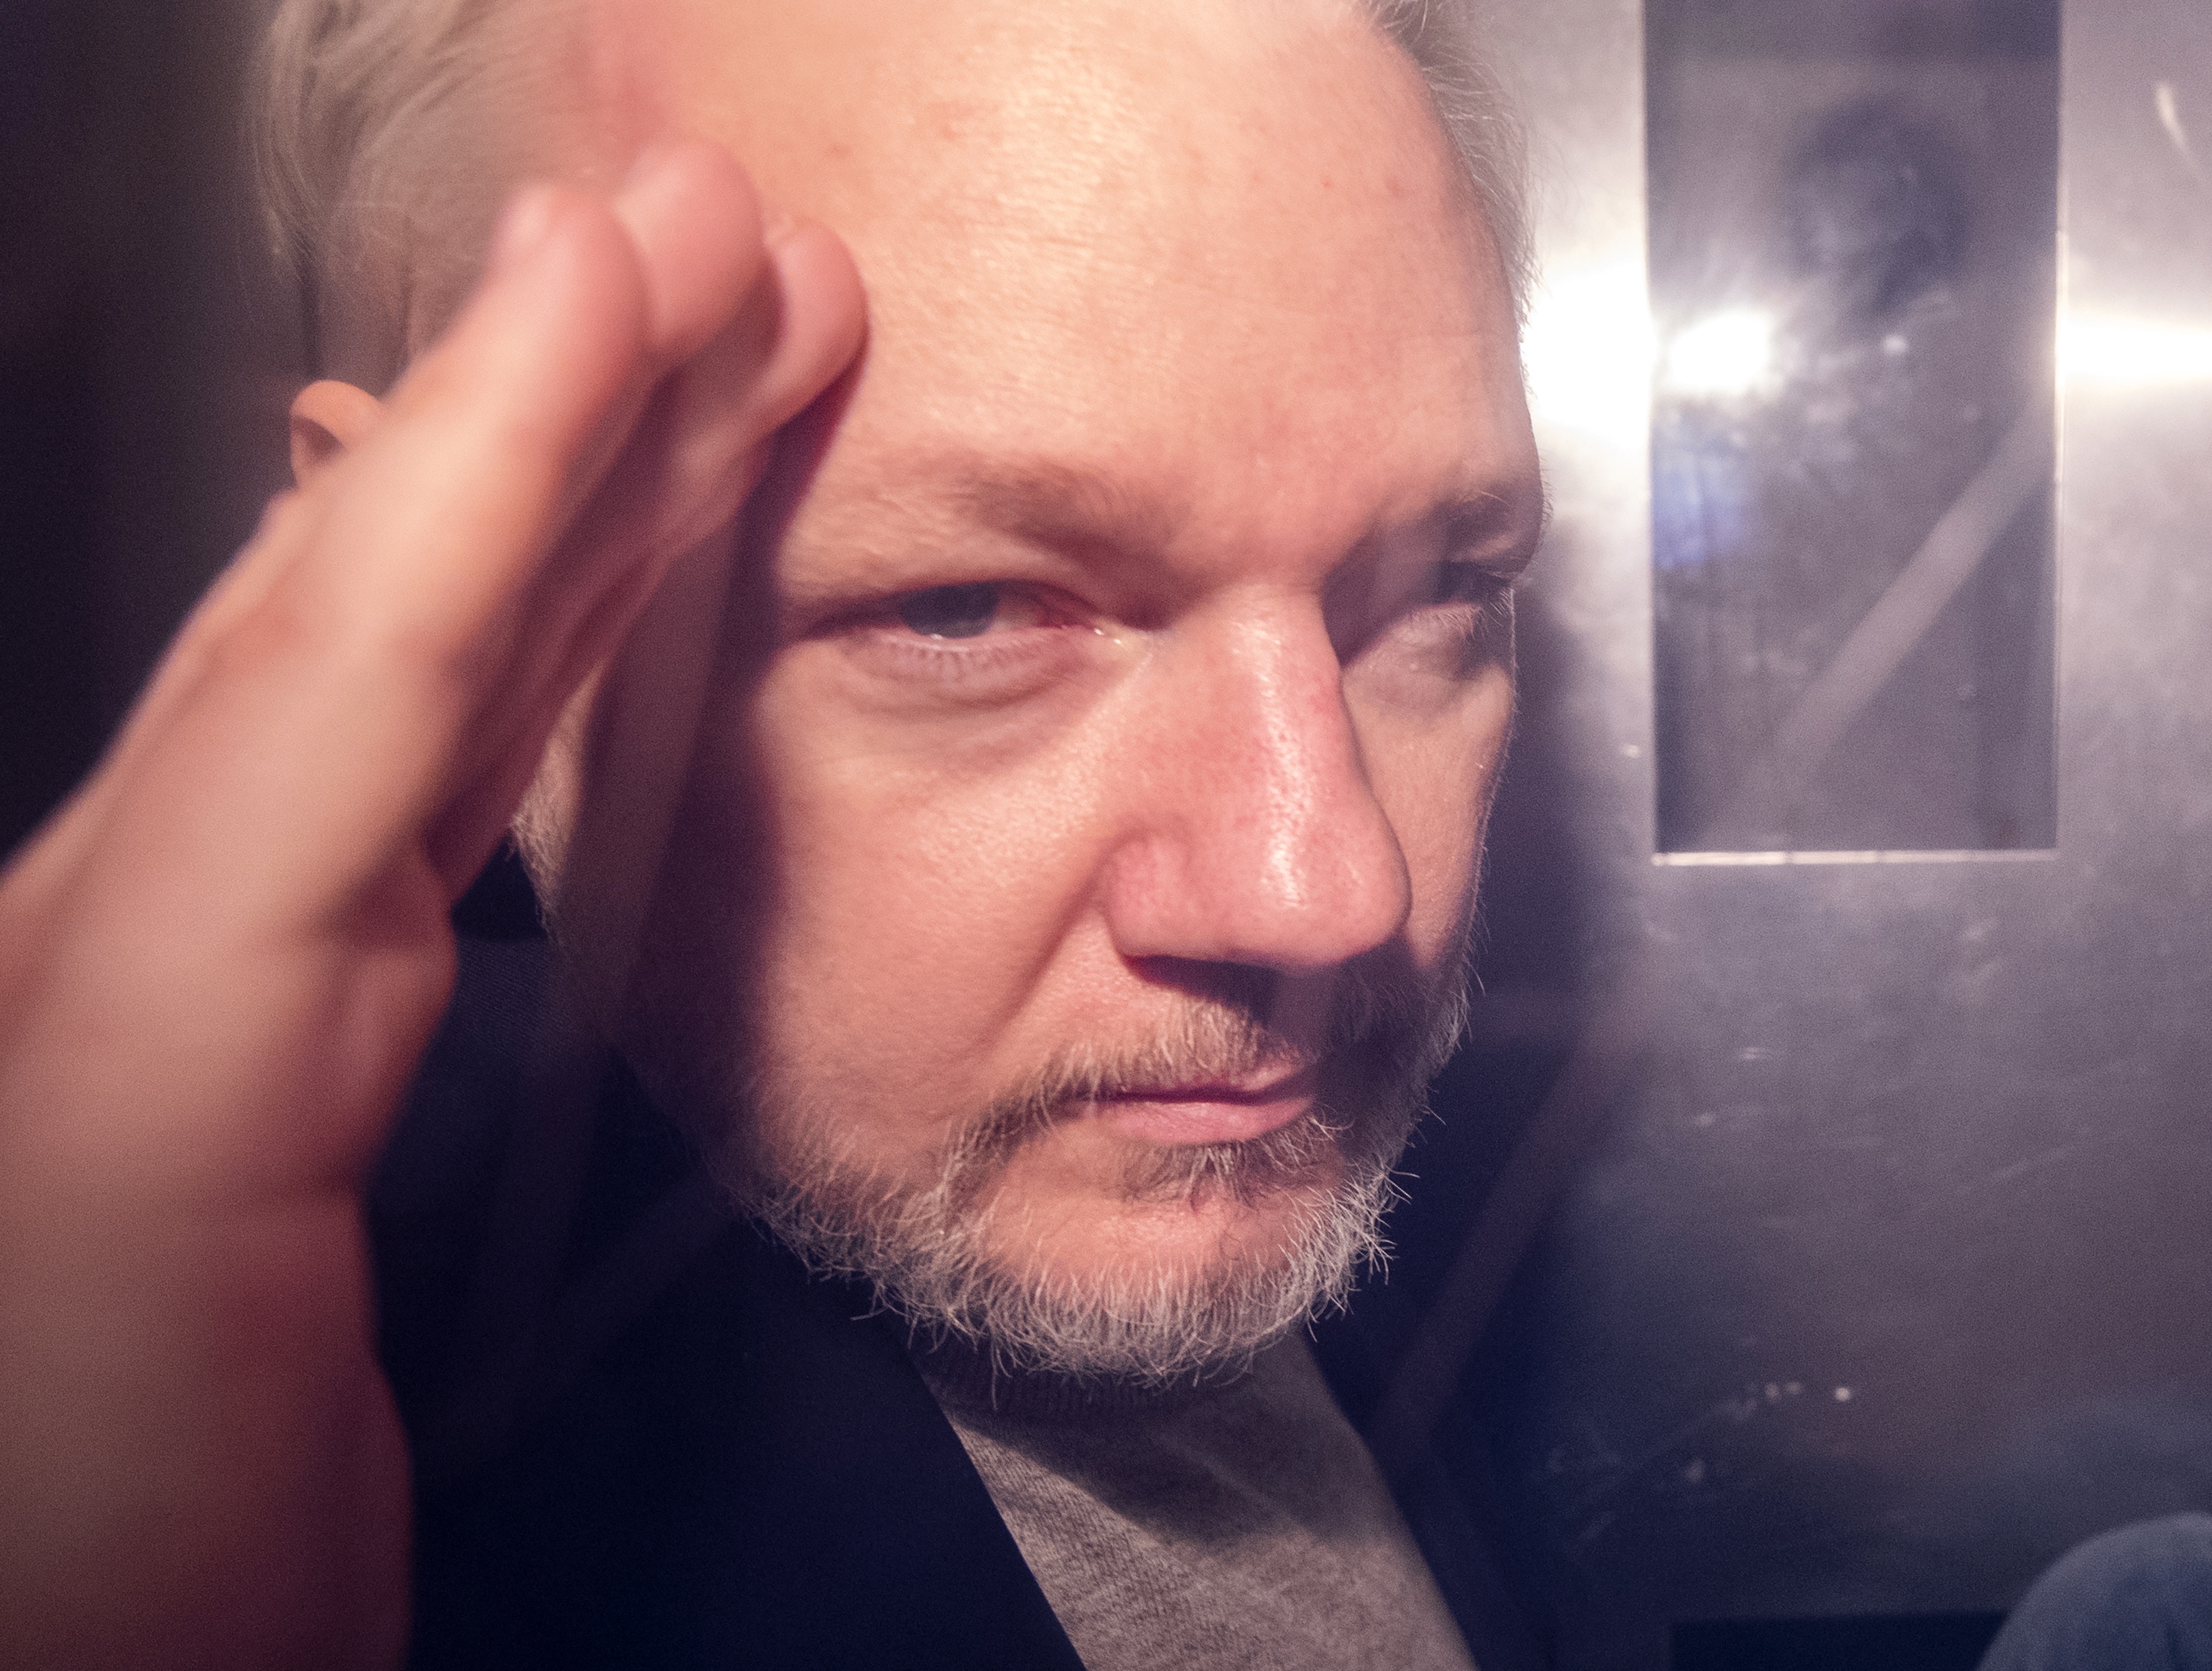 epa07566262 (FILE) - Wikileaks co-founder Julian Assange, in a prison van, as he leaves Southwark Crown Court in London, Britain, 01 May 2019, reissued 13 May 2019. Media reports on 13 May 2019 state that Swedish prosecutors are to announce whether they are reopening an inquiry into a rape allegation against Julian Assange at the request of the alleged victim's lawyer.  EPA/FACUNDO ARRIZABALAGA